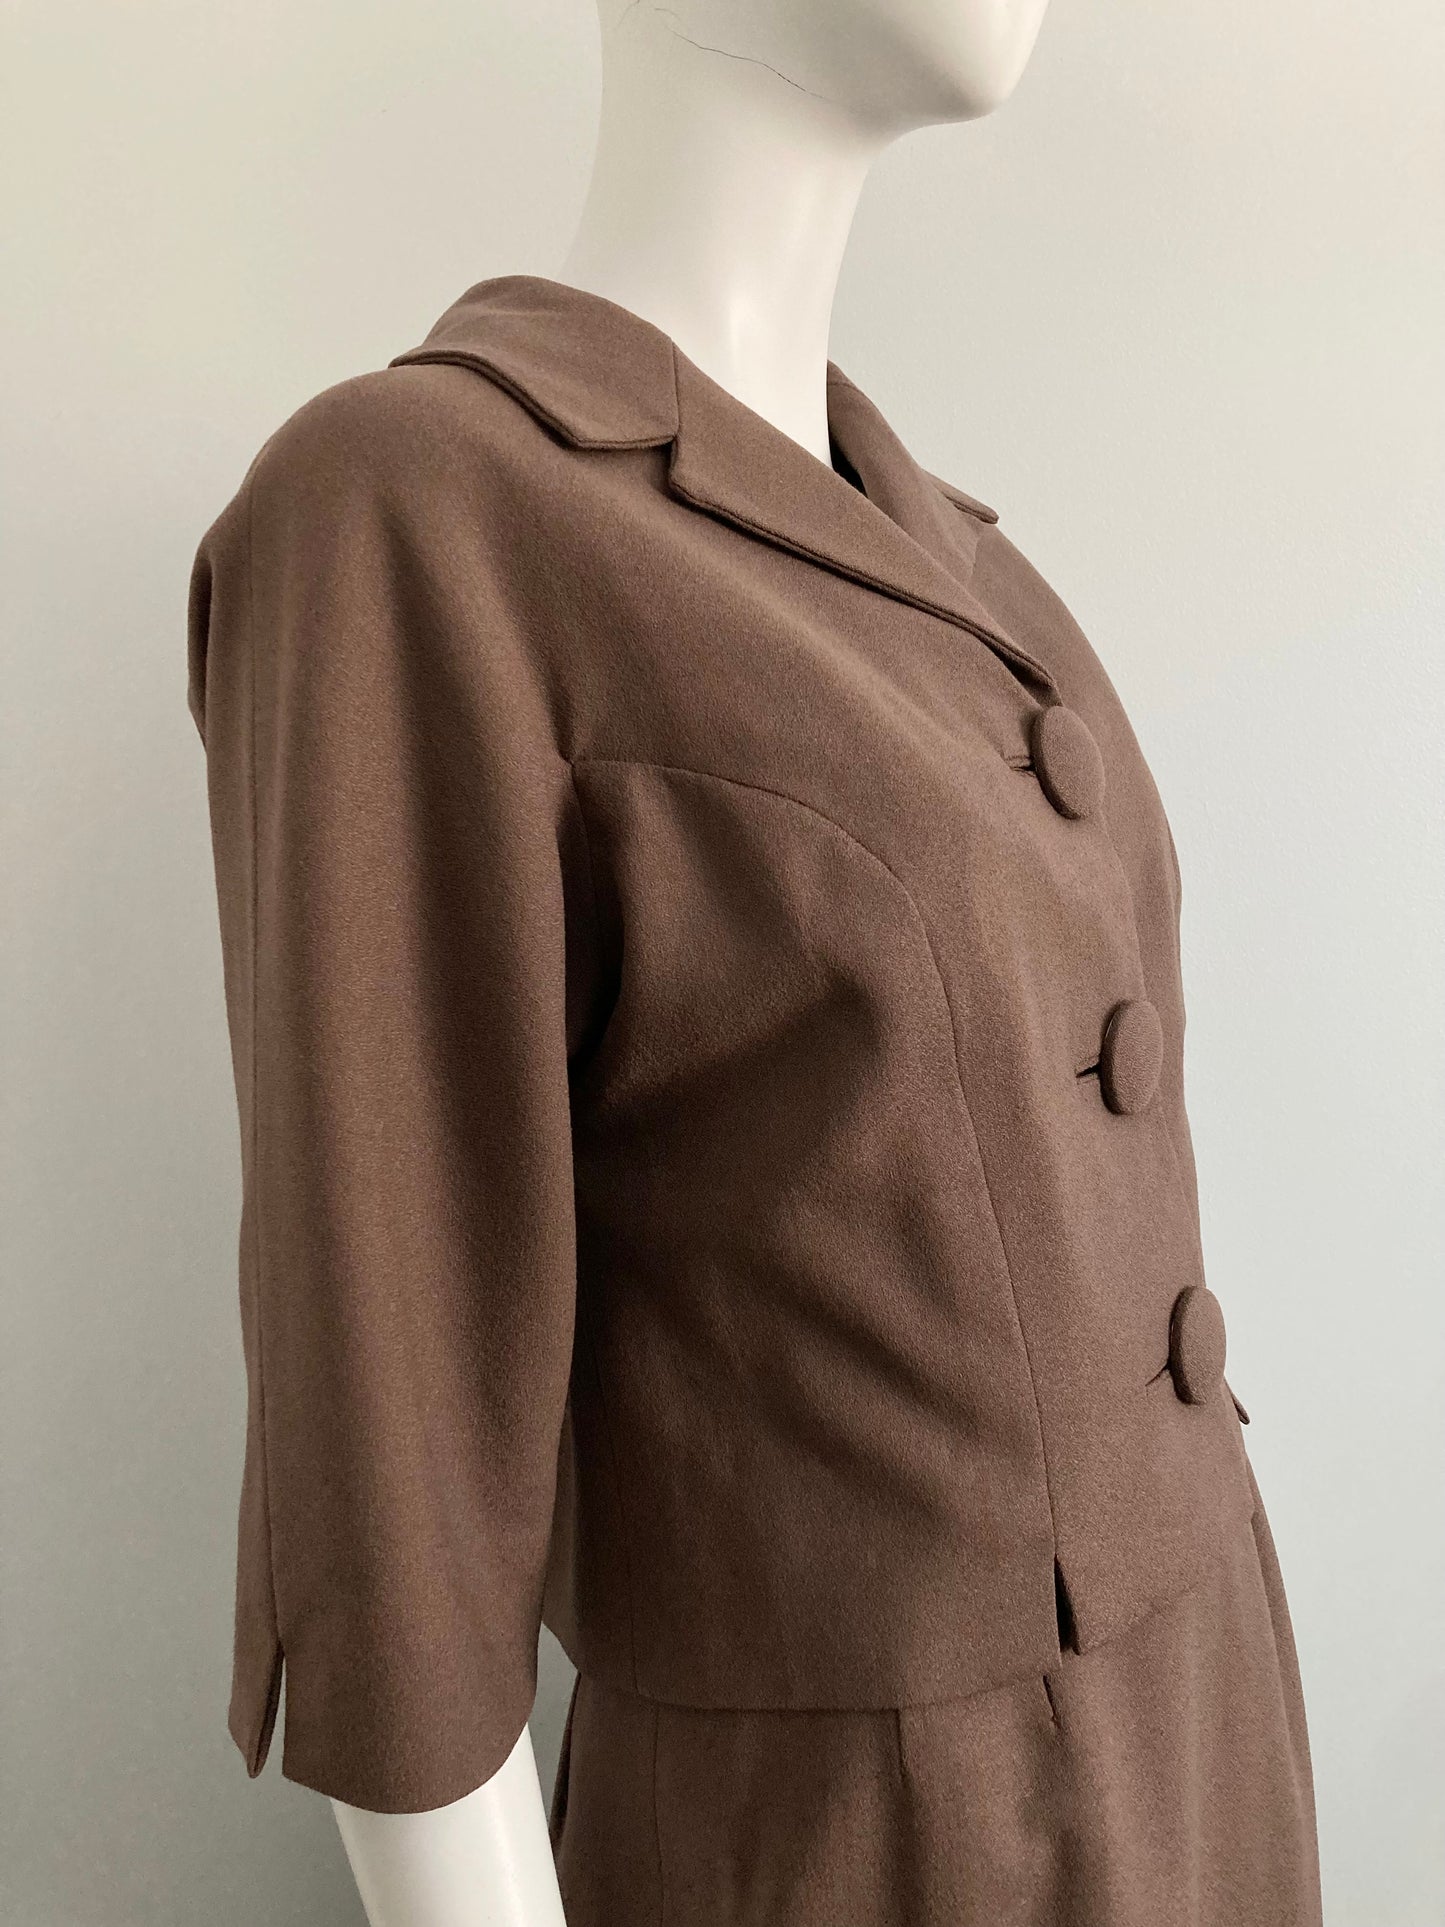 1950s Skirt Suit Set, Matching Jacket and Skirt, Size XS